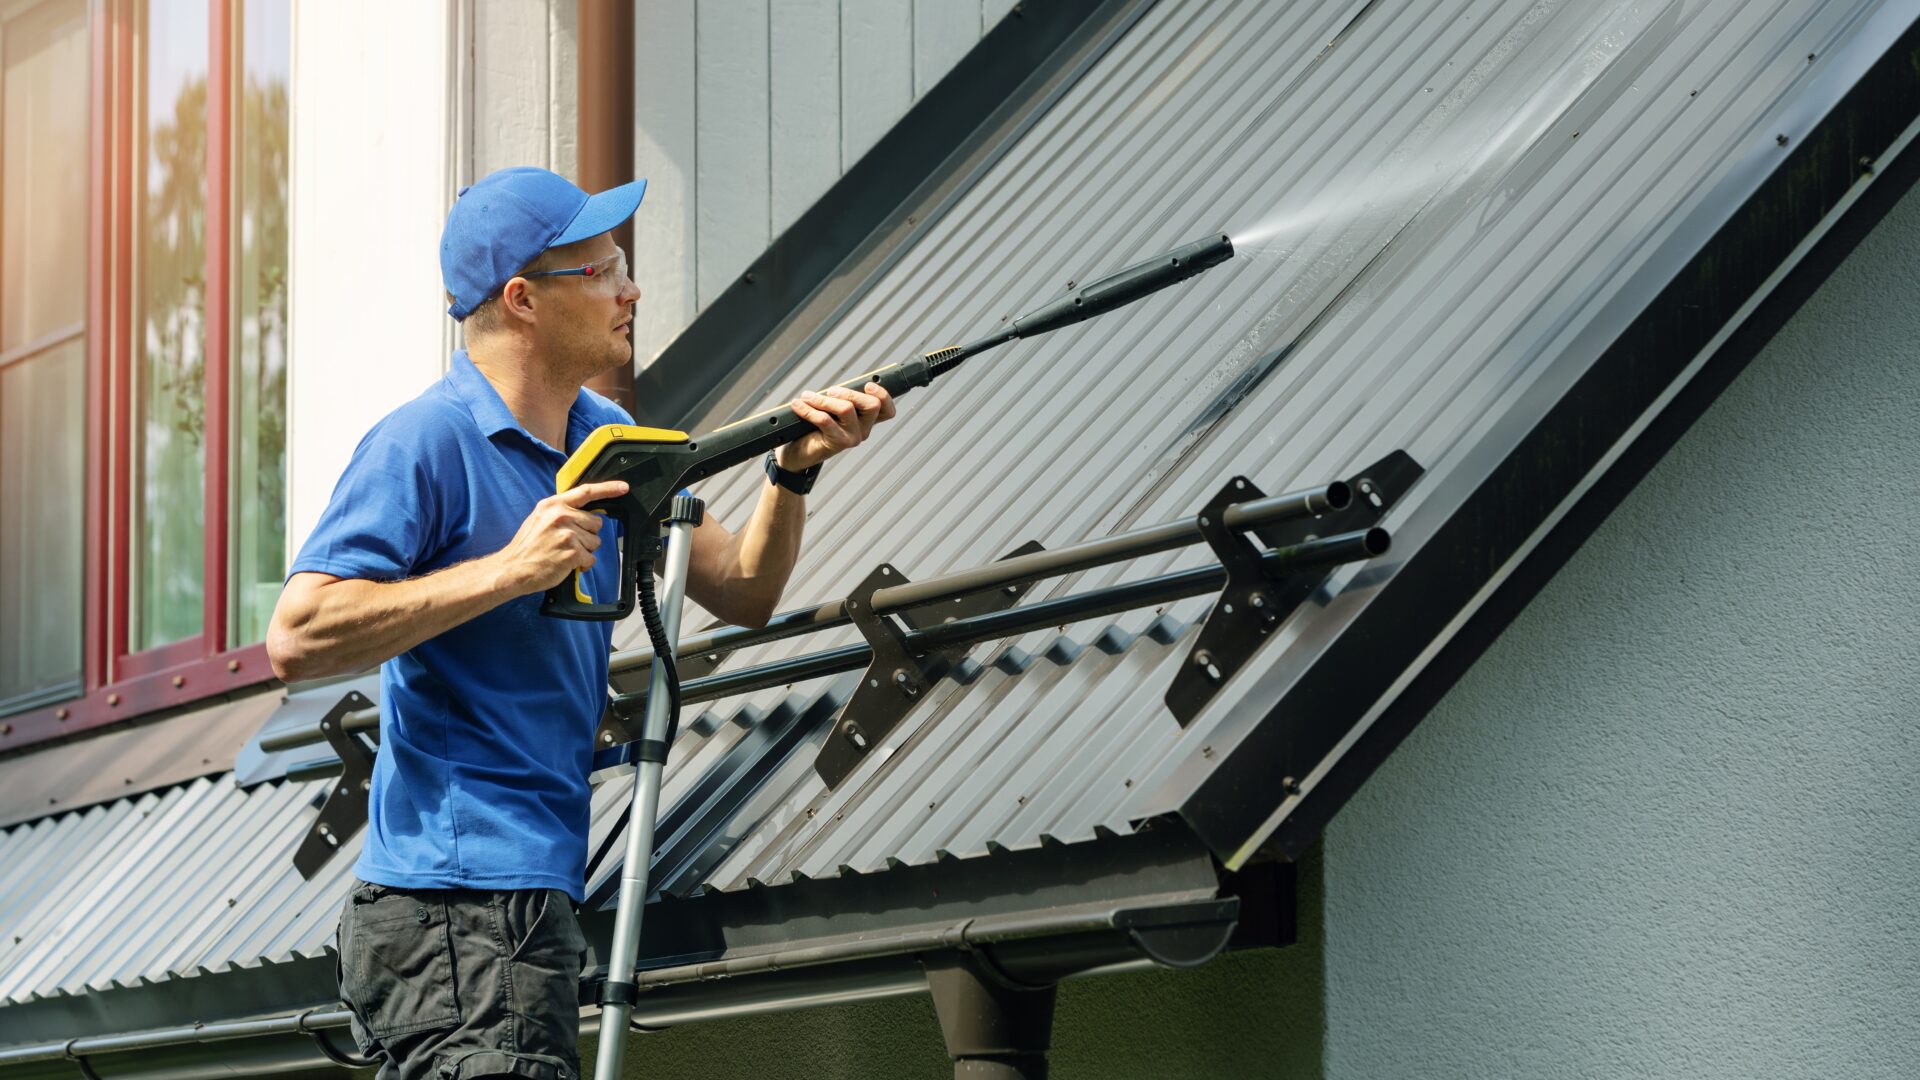 A roofer cleans a metal roof with a high-pressure hose